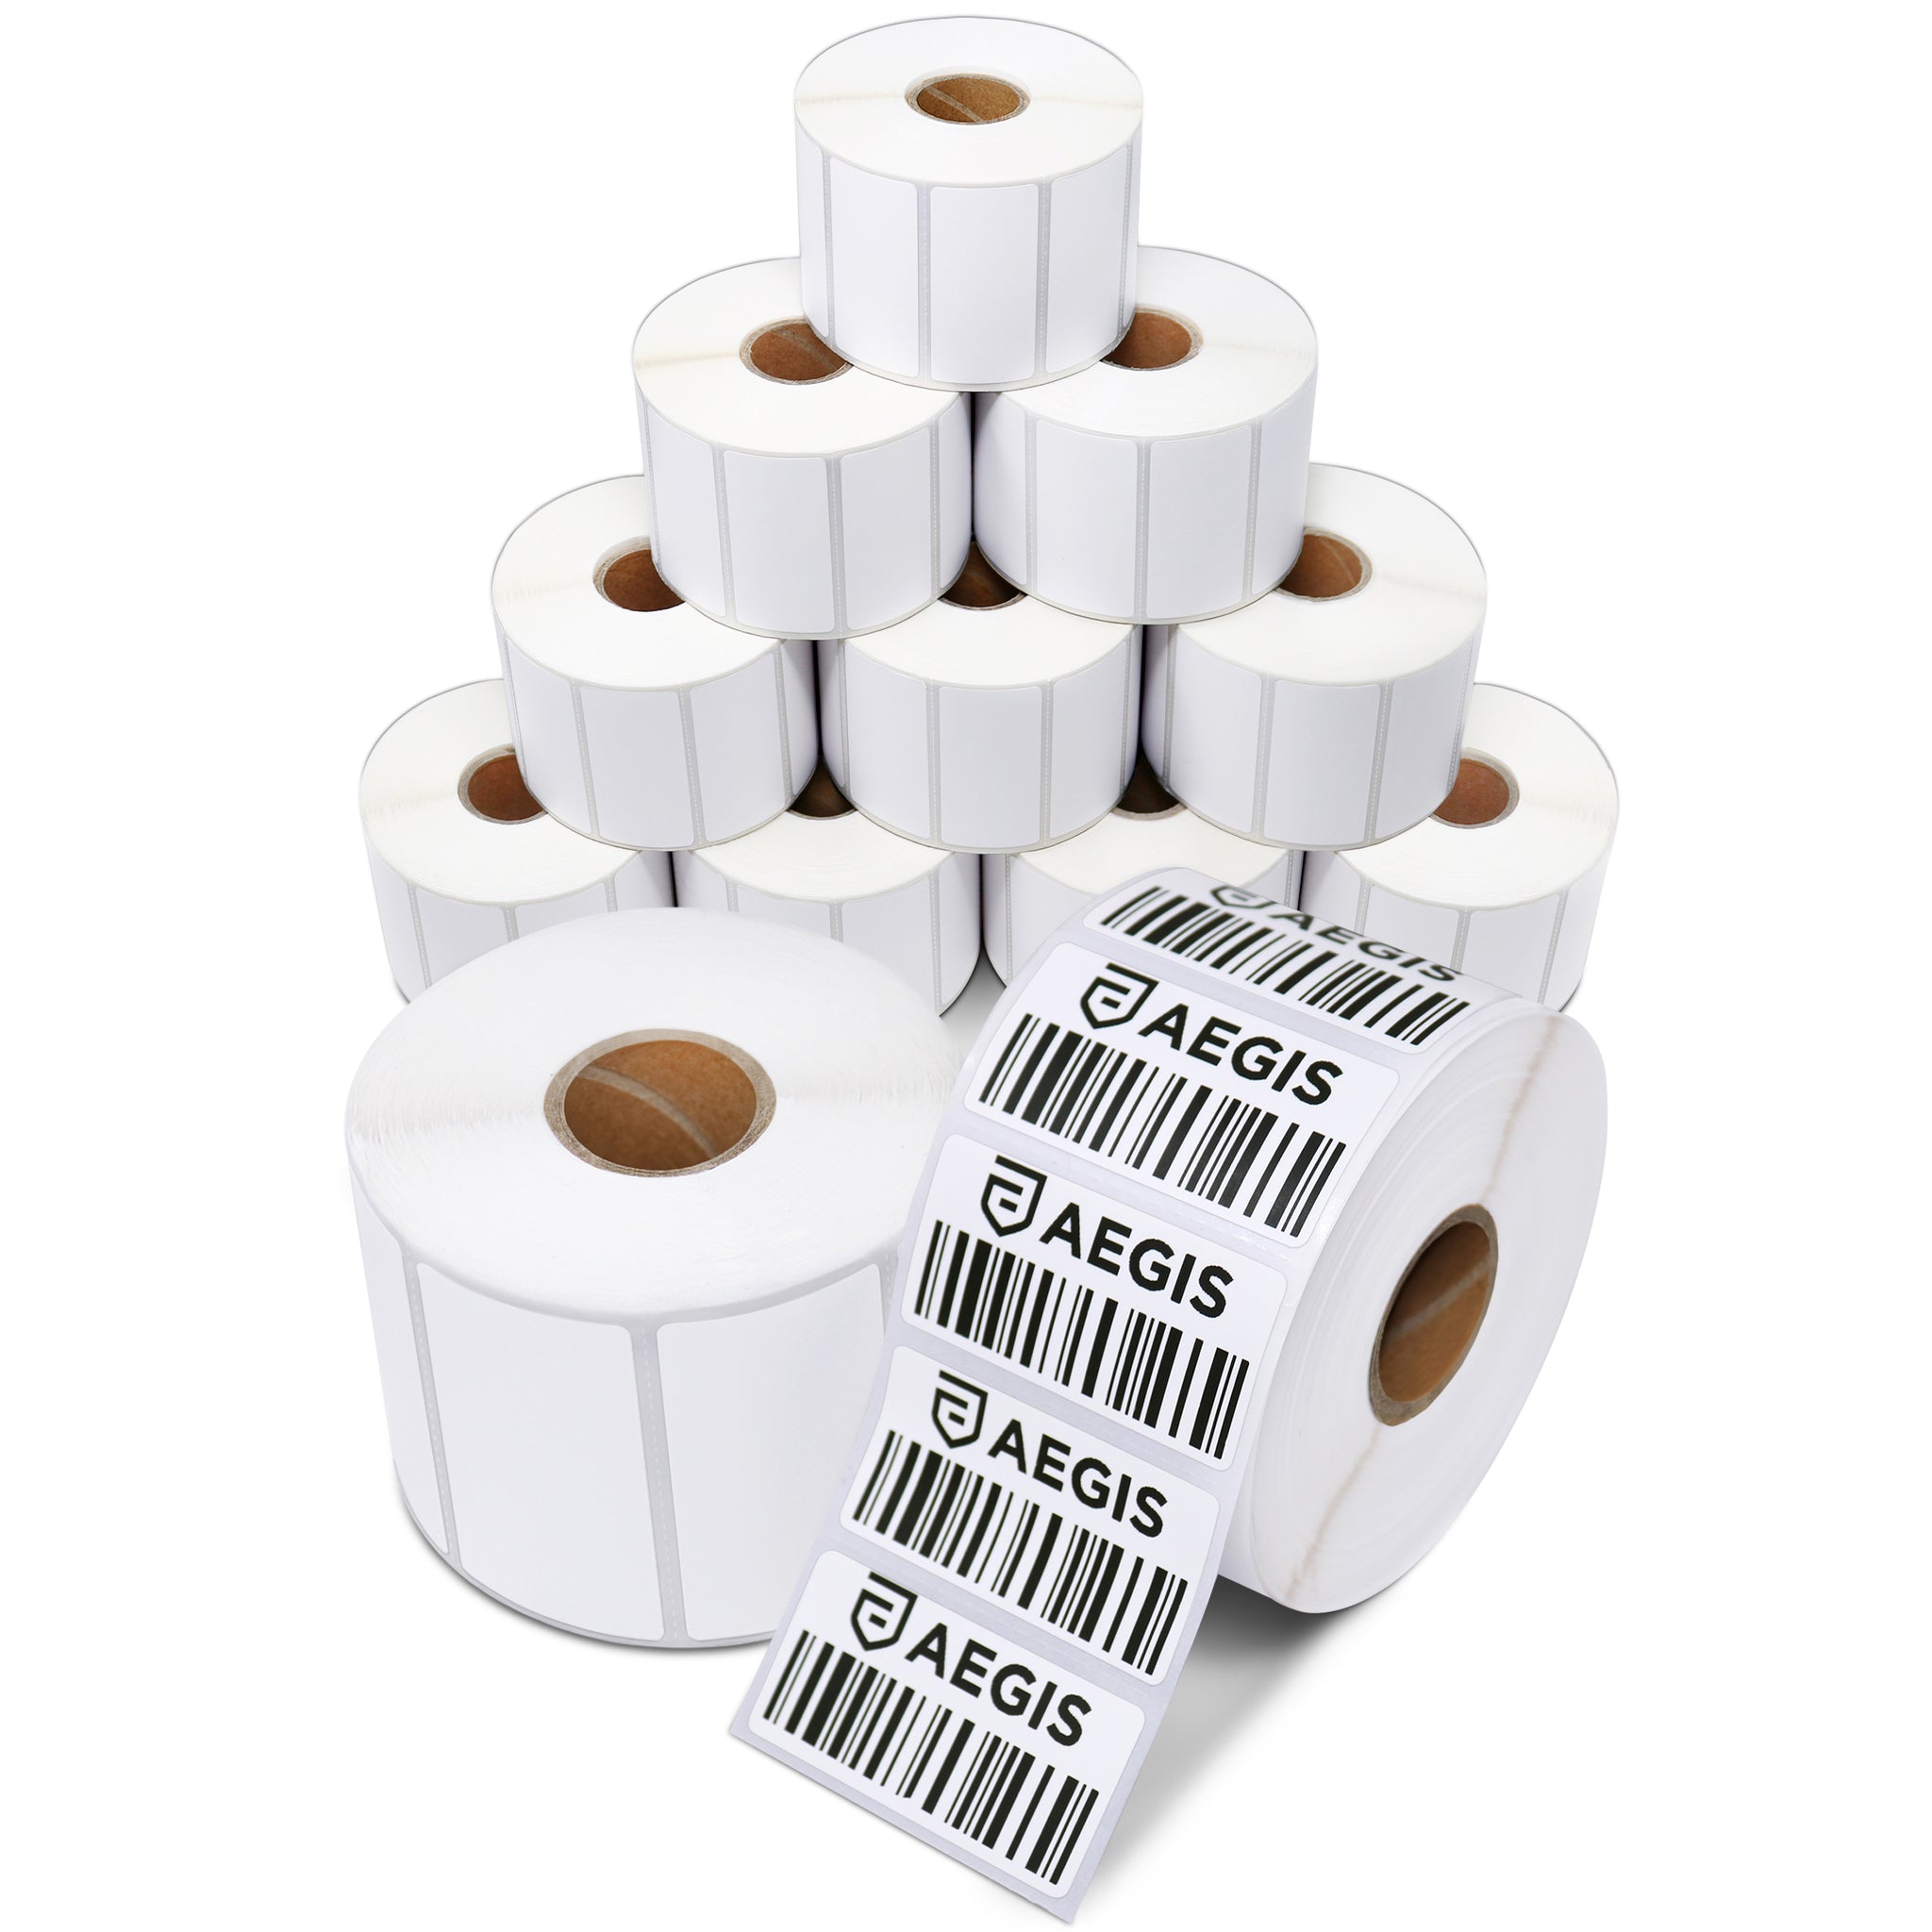 RD-2-15-960-1 - Zebra 2 x 1.5 Direct Thermal Labels